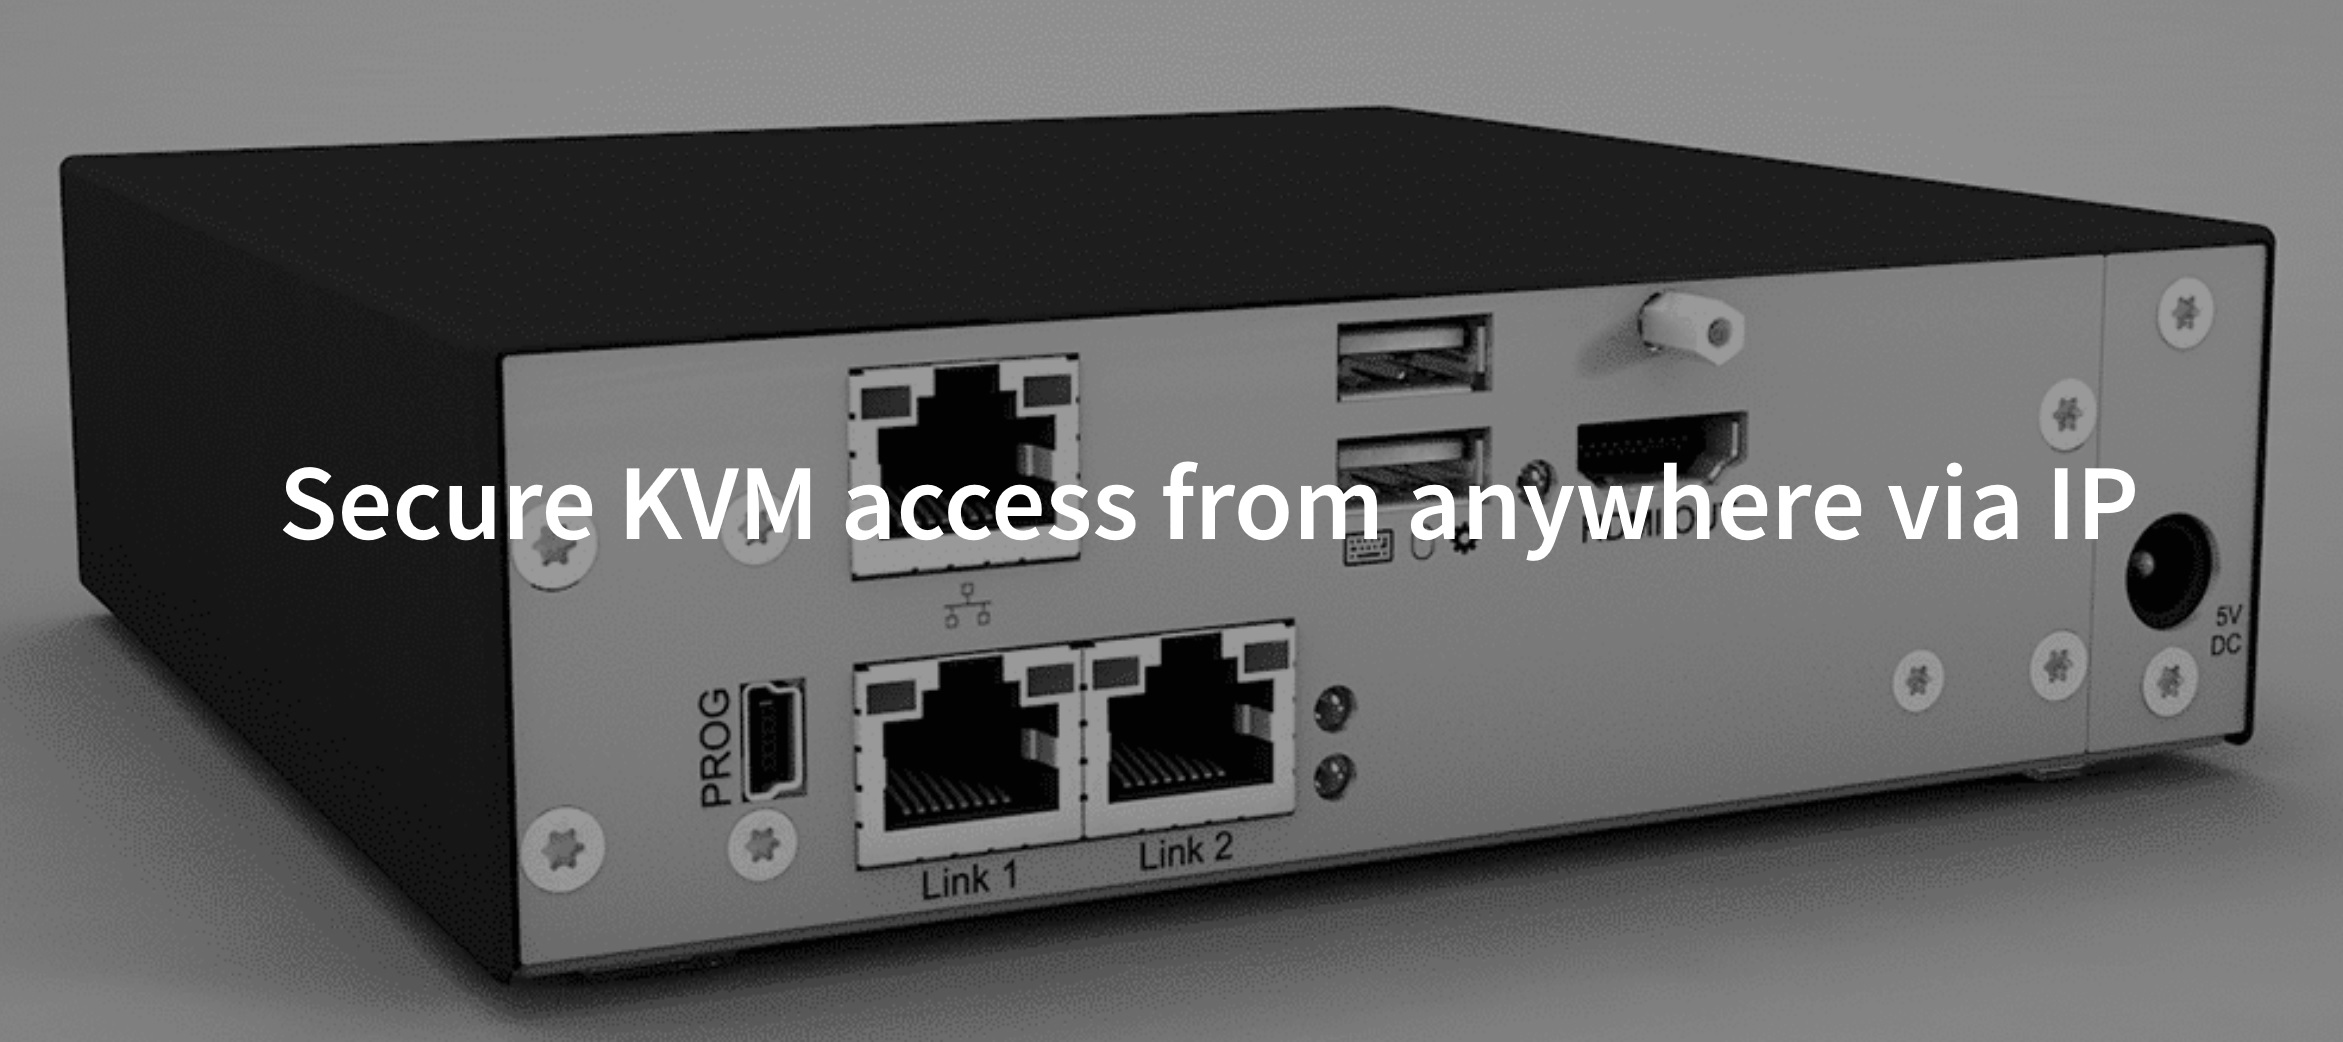 IHSE KVM over IP for Secure KVM access from anywhere